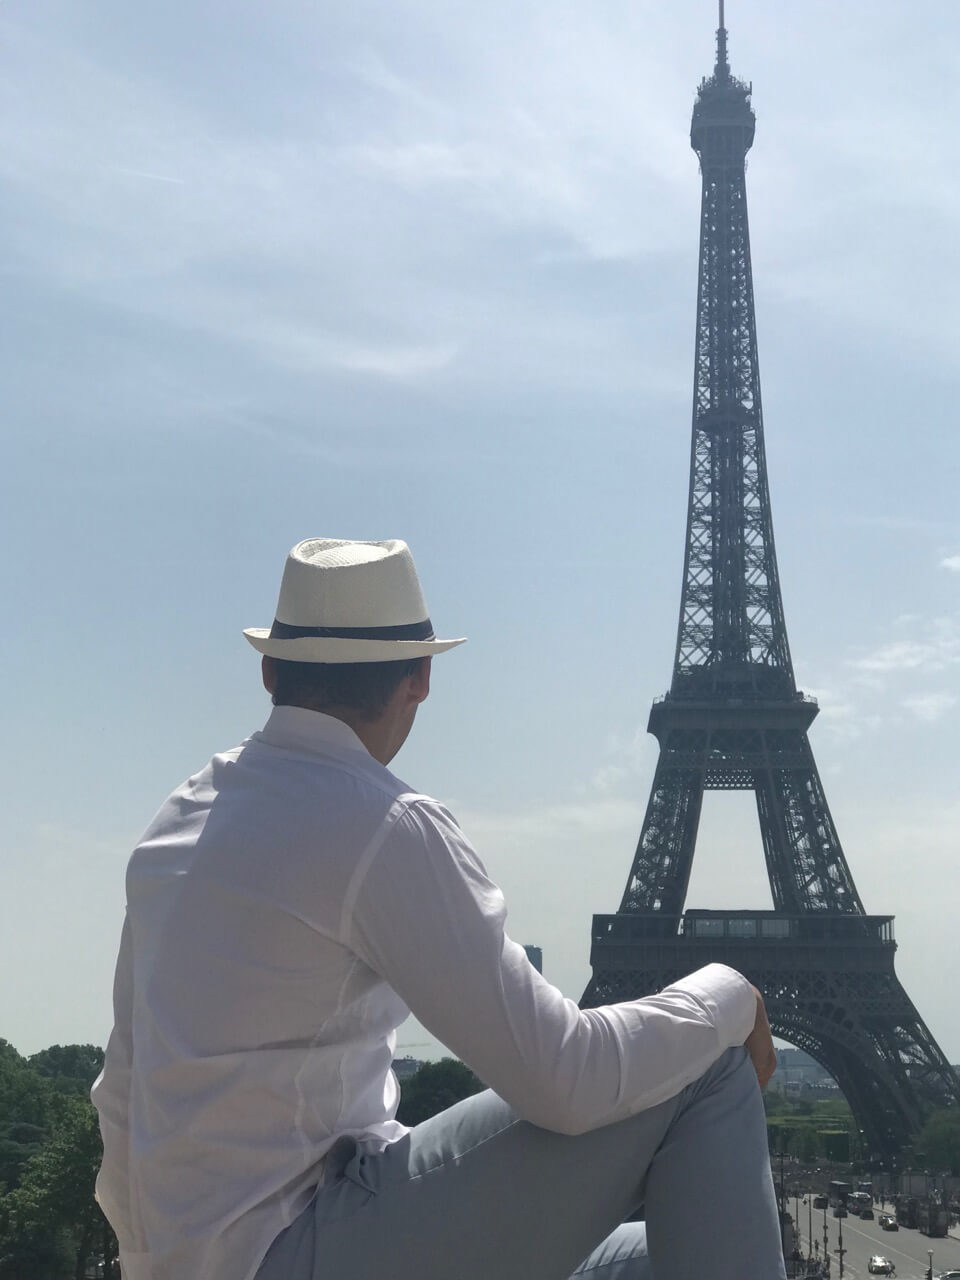 Pericles Rosa from the blog 7 Continents  Passport wearing a white shirt, white hat and light blue pants sitting at the Trocadéro, Paris, admiring the Eiffel Tower